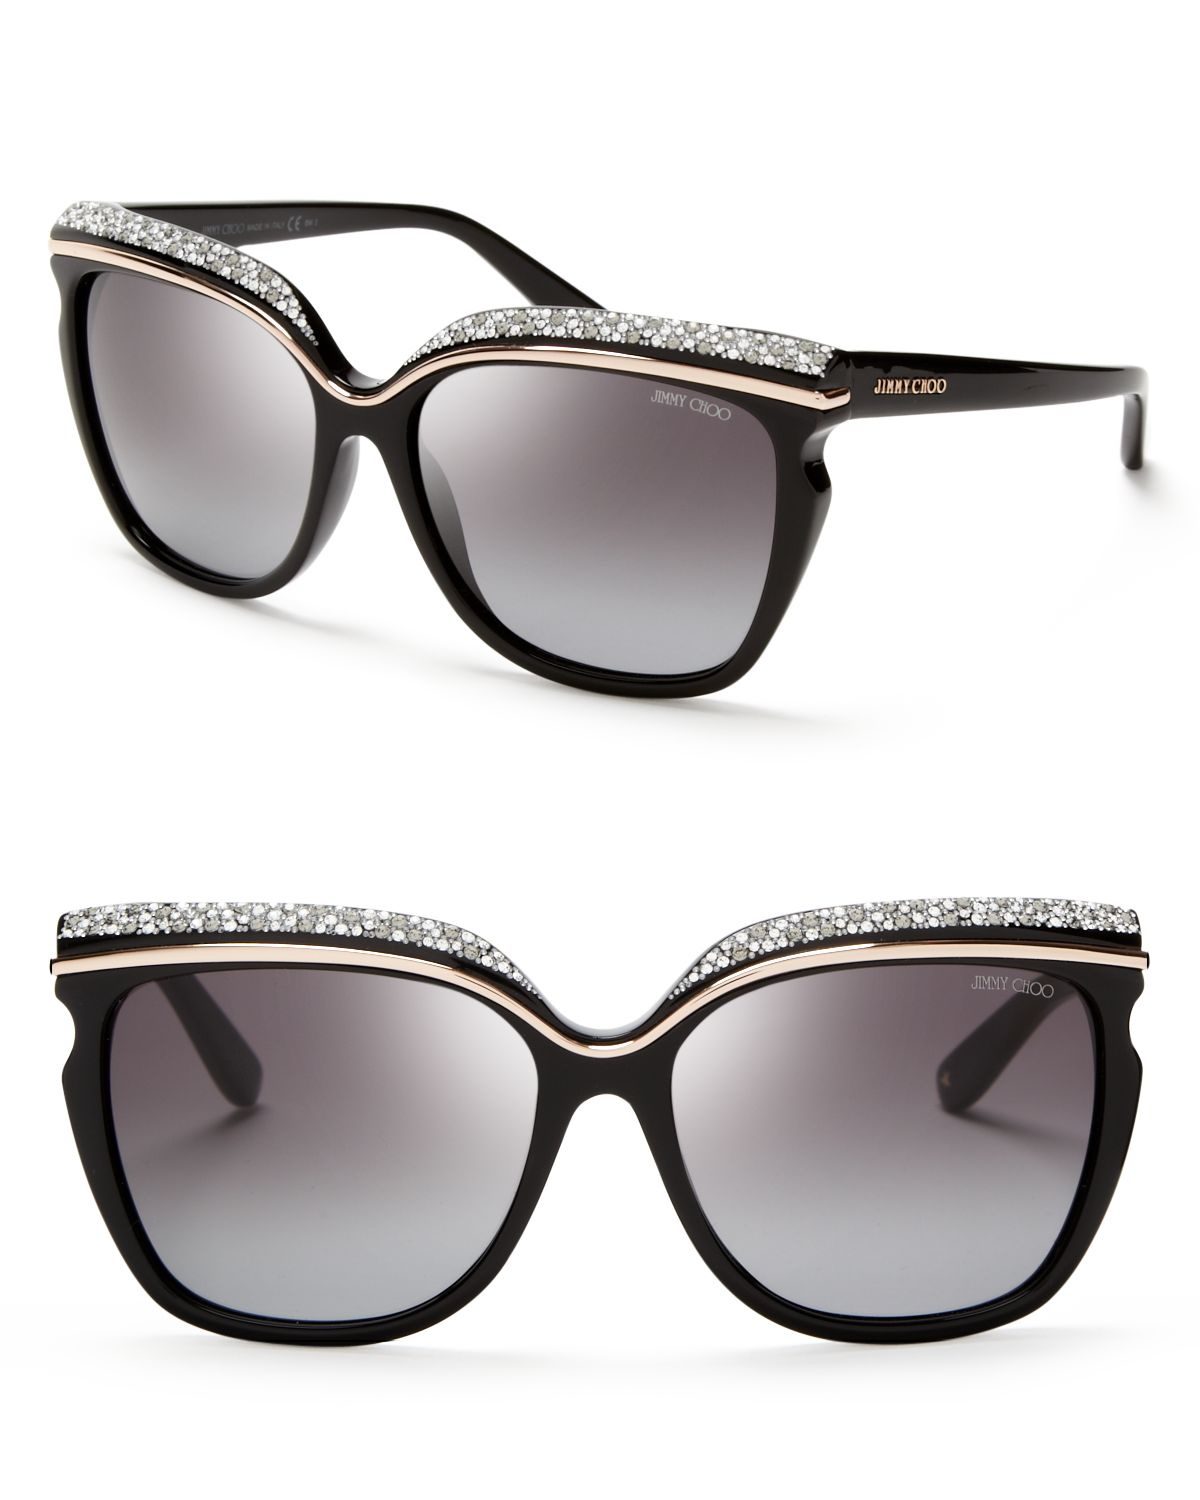 jimmy choo sunglasses for sale | Simply Accessories